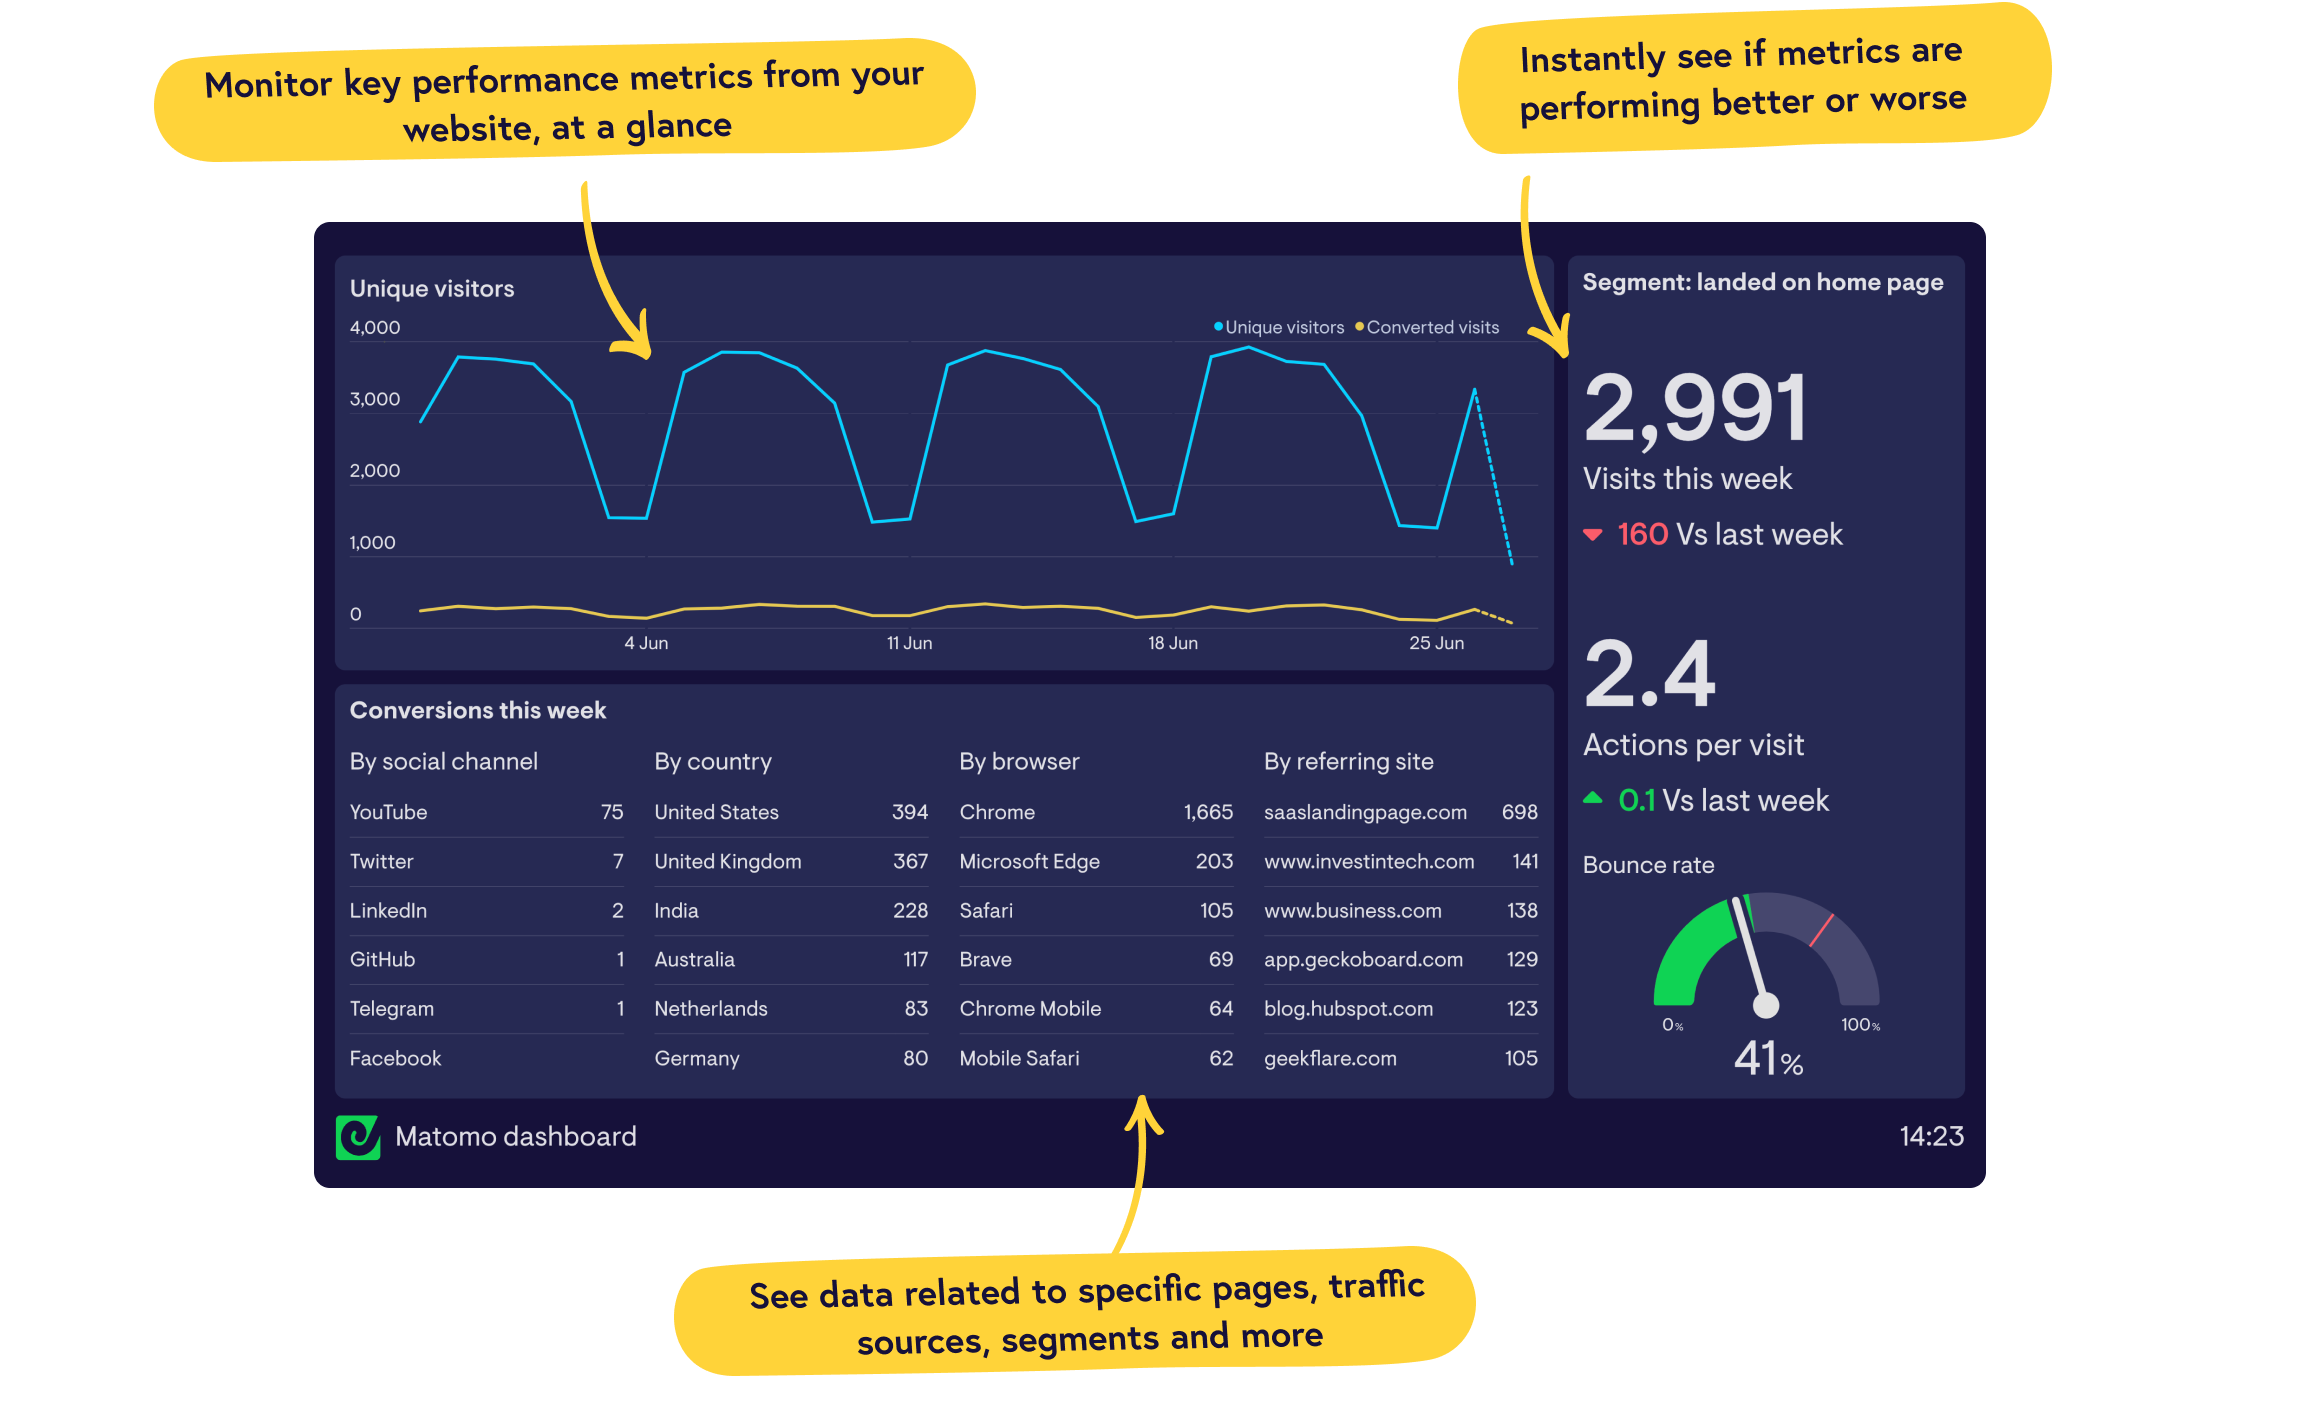 Real-time Matomo dashboards from Geckoboard